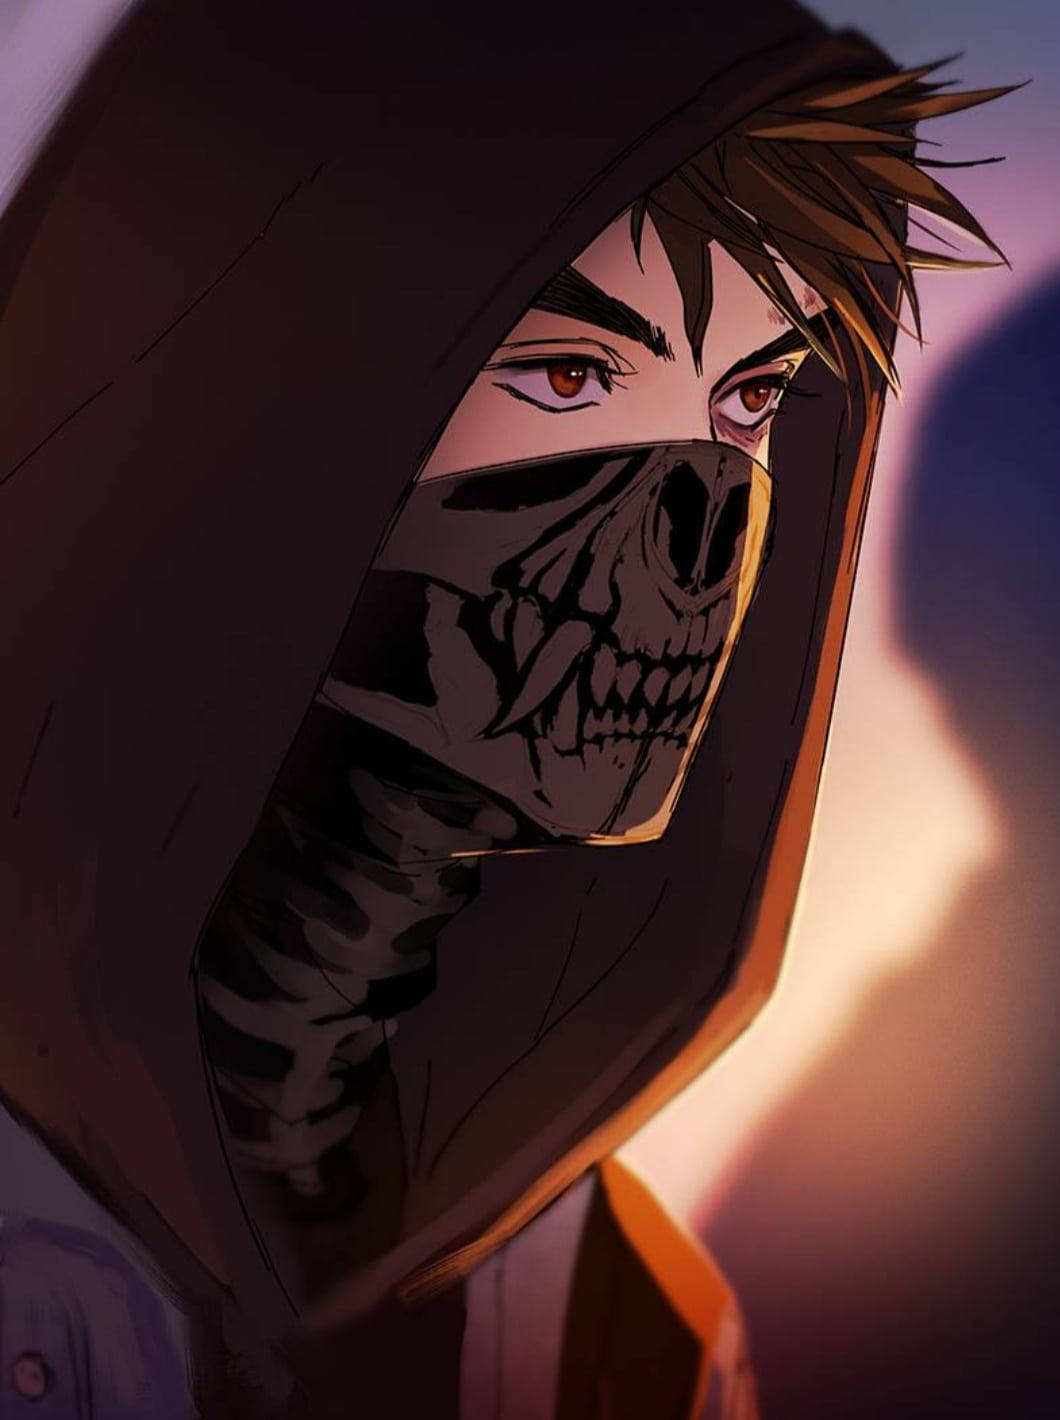 Cool Boy Anime With Skull Mask Background